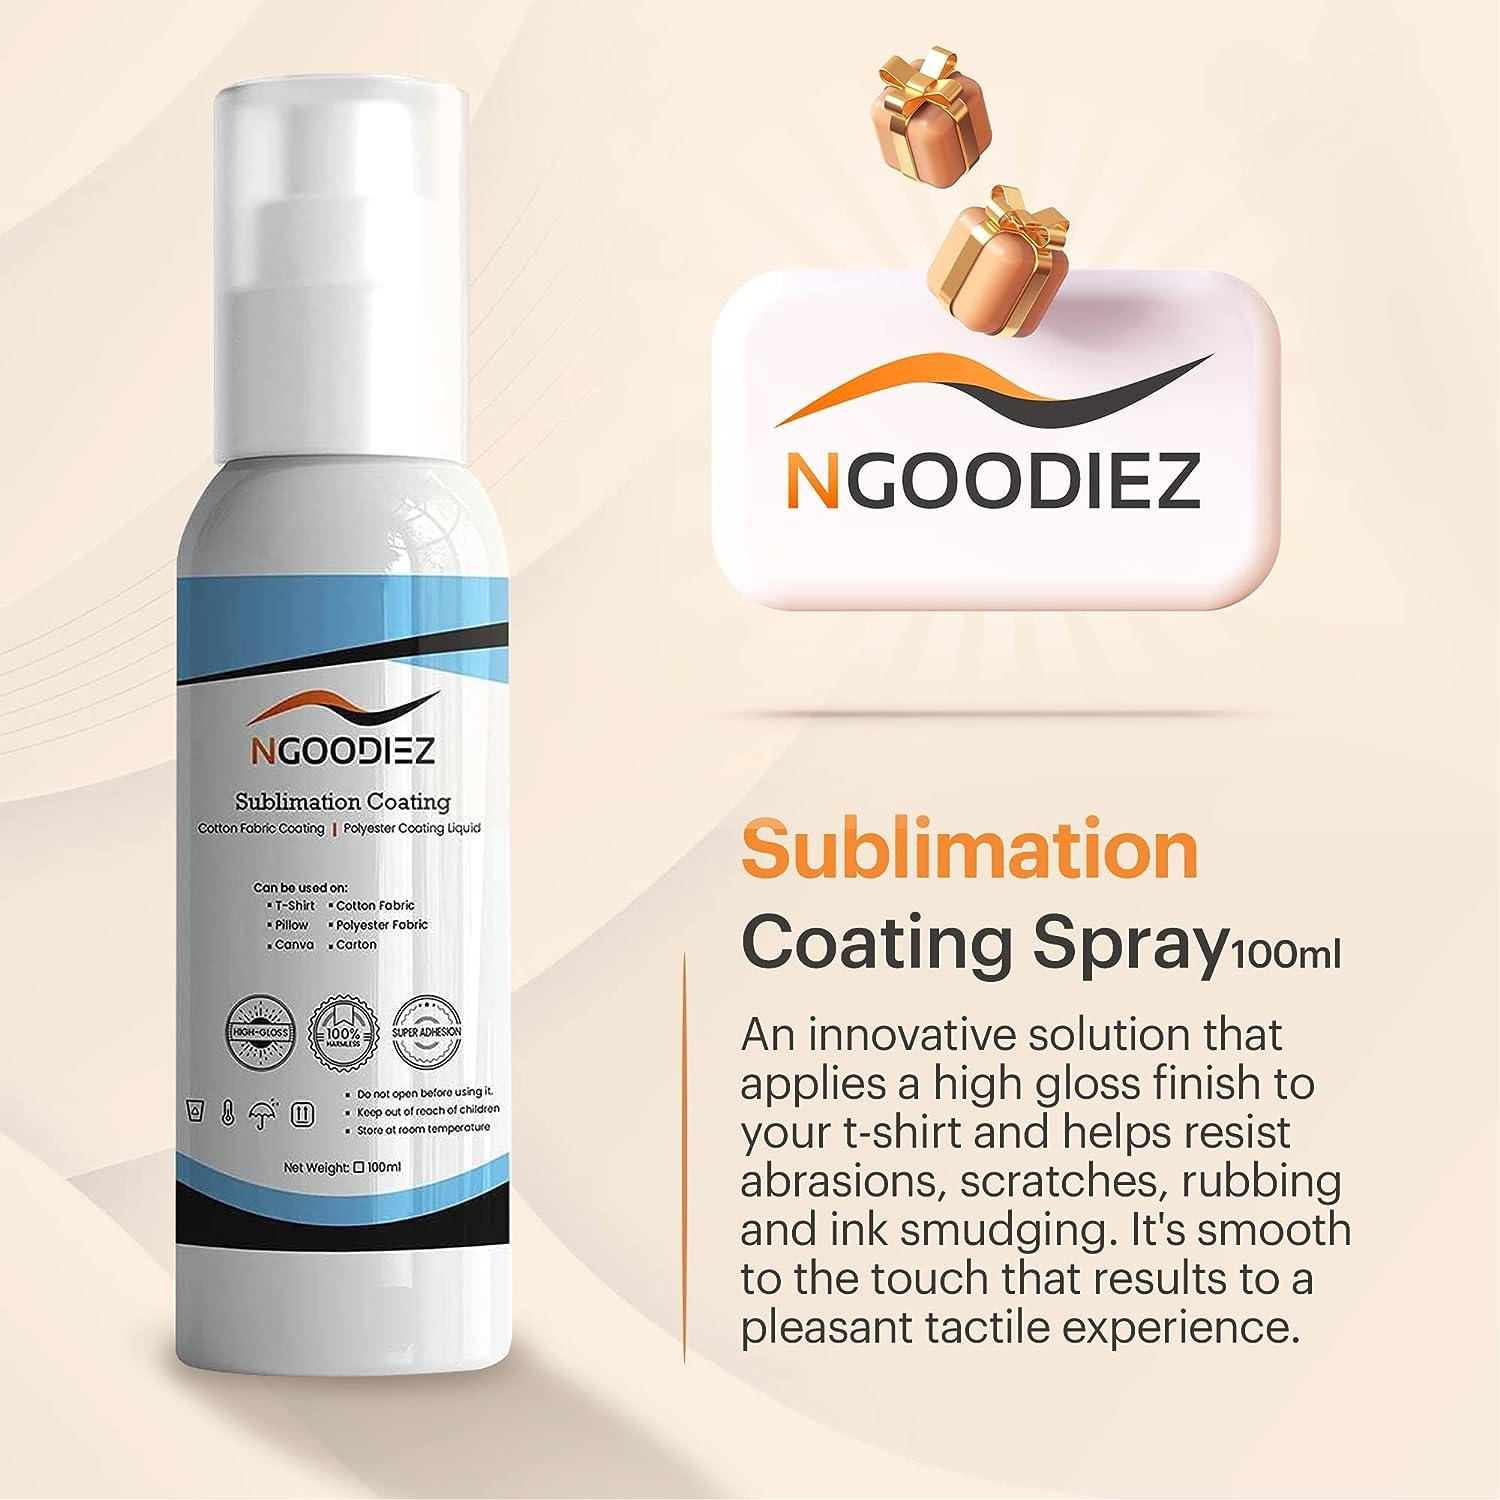 NGOODIEZ Sublimation Coating Spray for All Fabric, Including 100% Cotton,  Polyester, T-shirts, Canva Coating Liquid- Quick Dry Formula, High Gloss